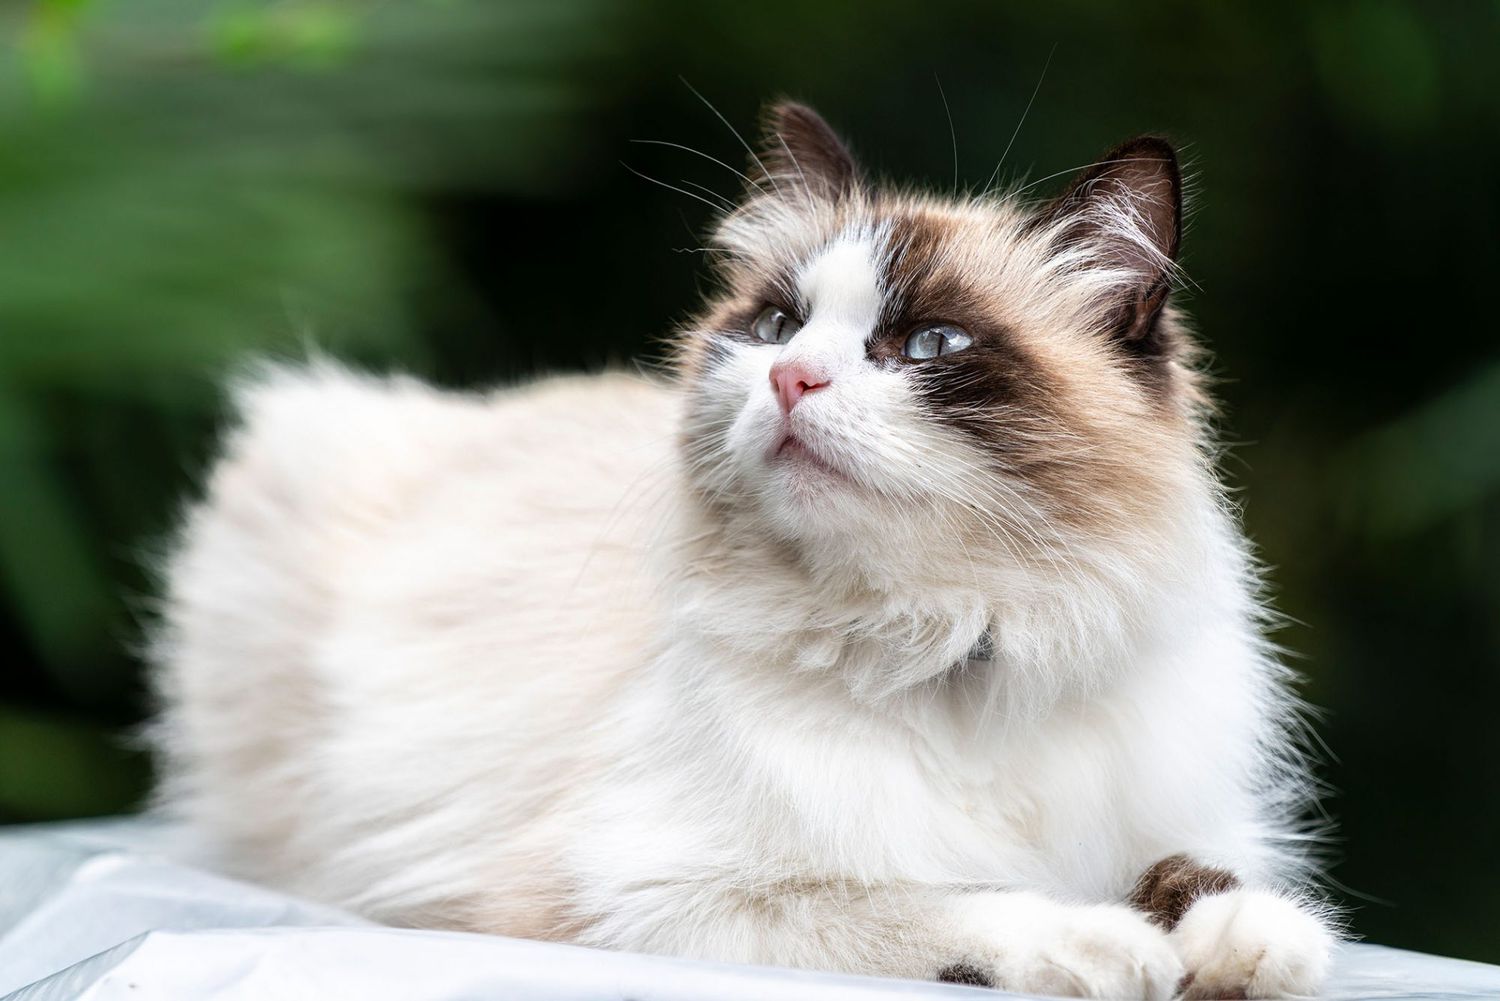 17 Long-Haired Cat Breeds to Swoon Over | Daily Paws